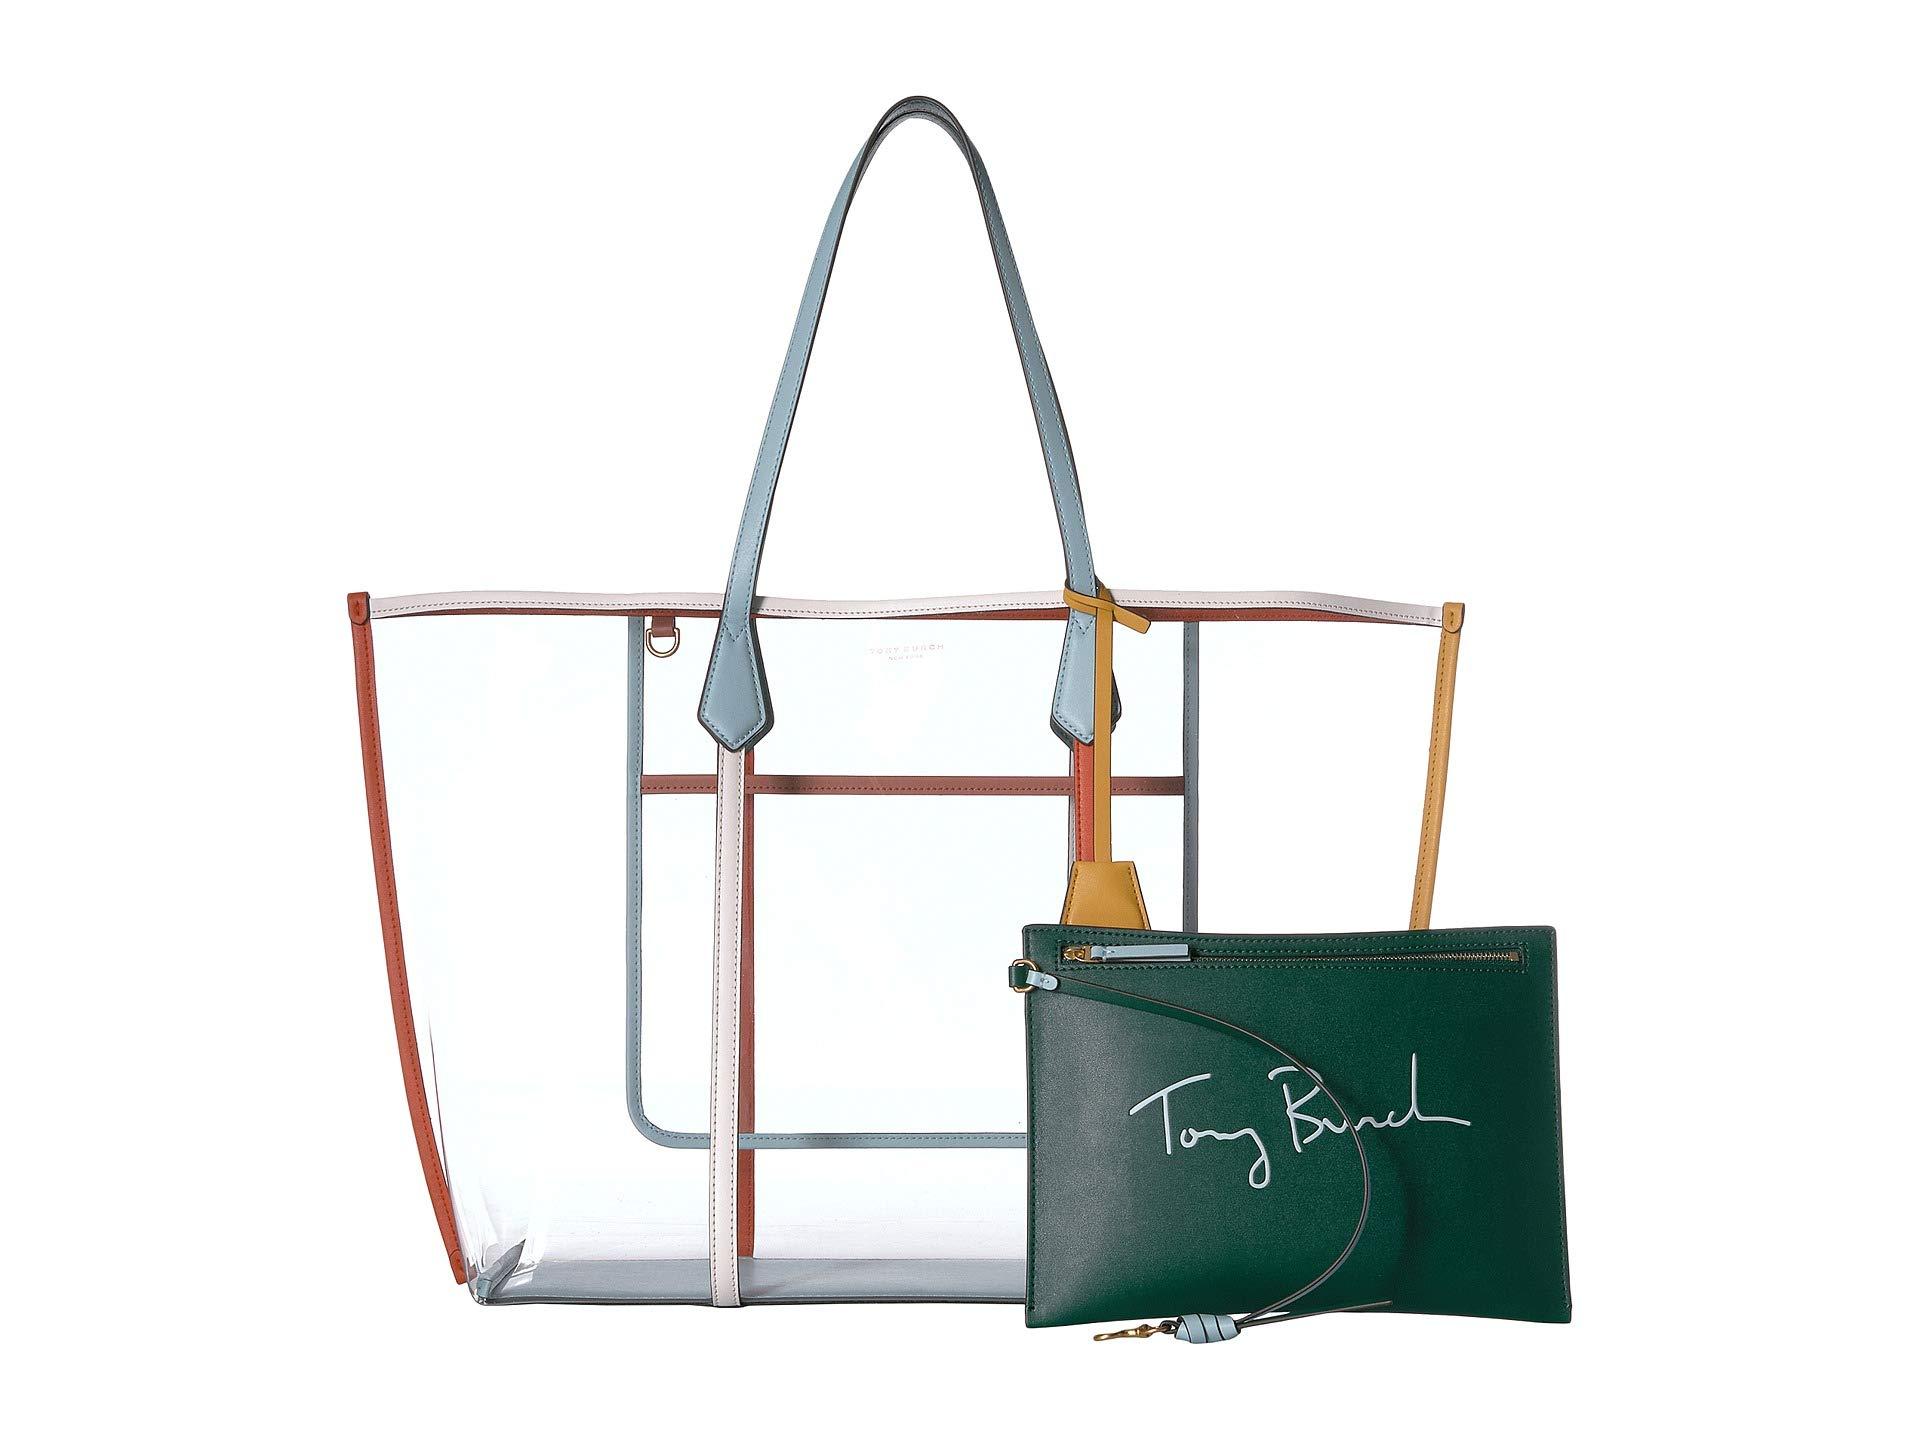 Tory Burch Perry Clear Oversized Tote - Lyst